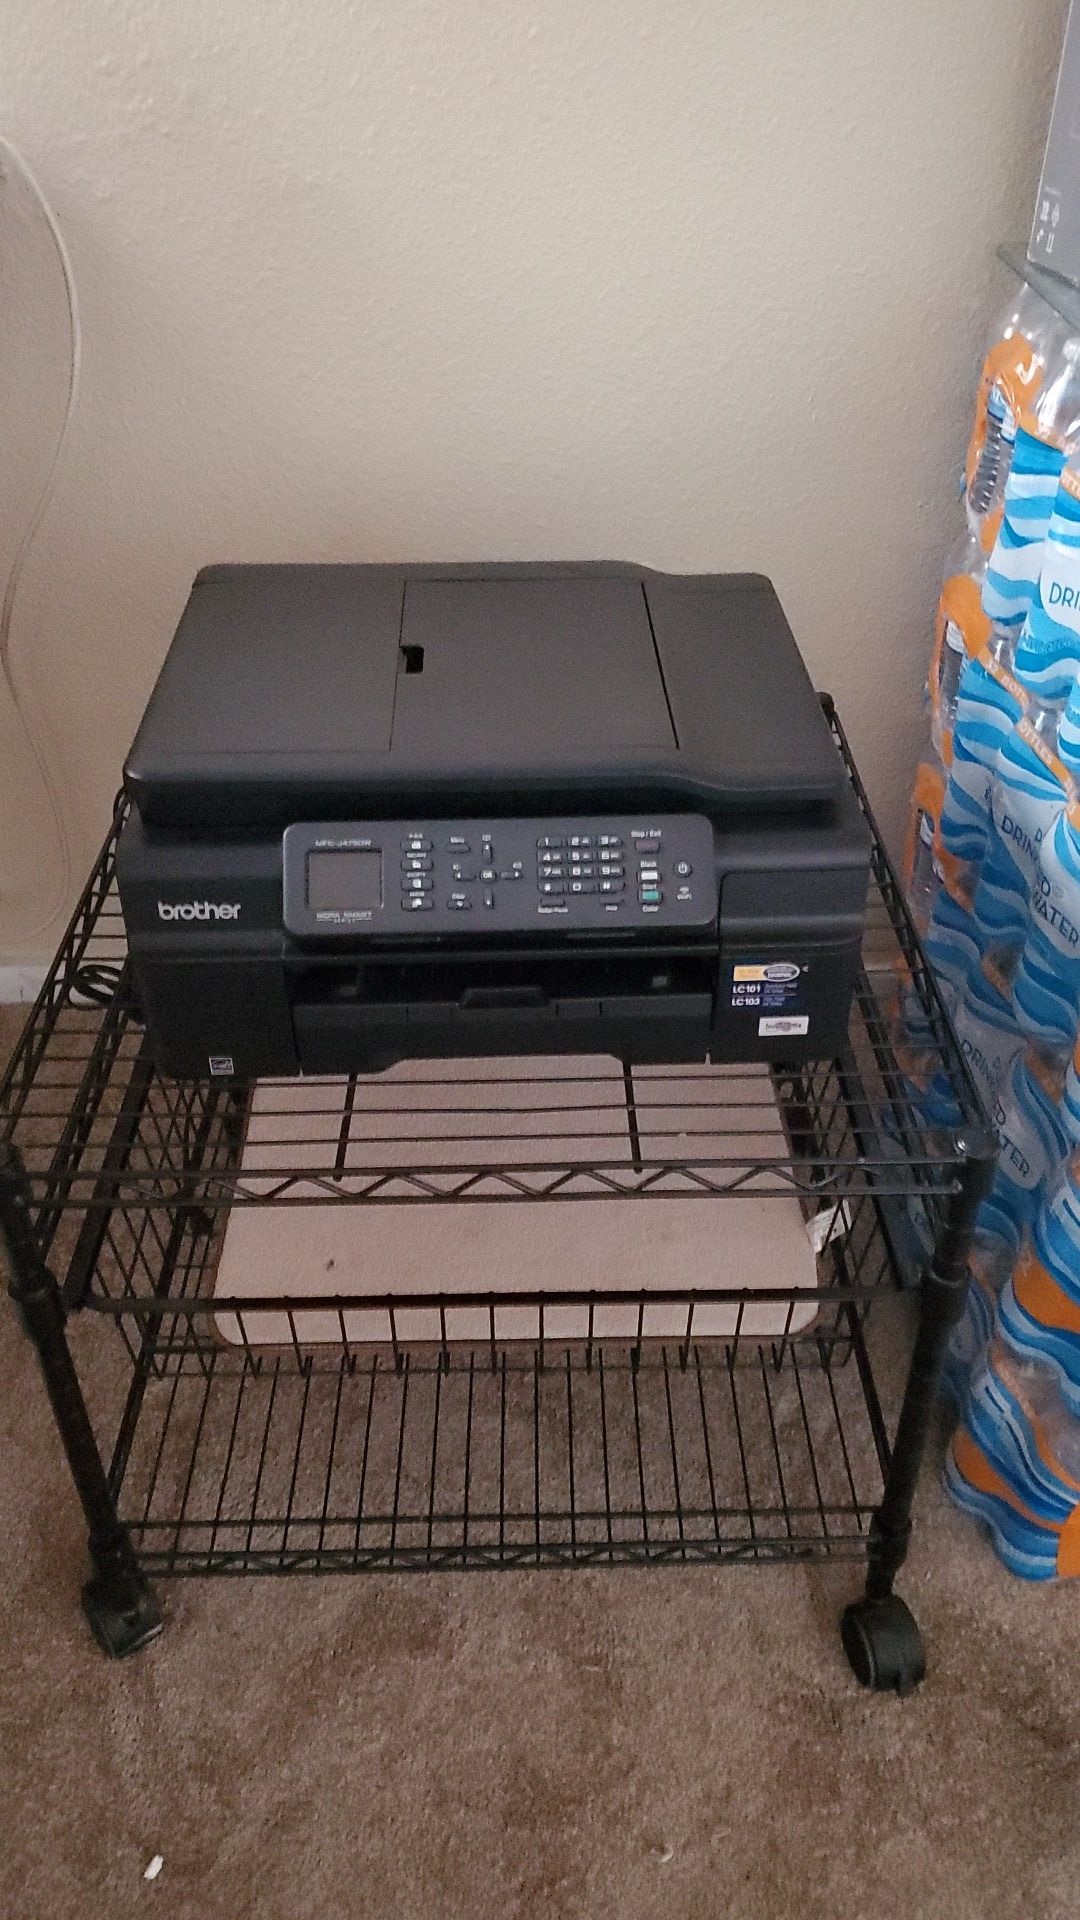 Brother all in one printer